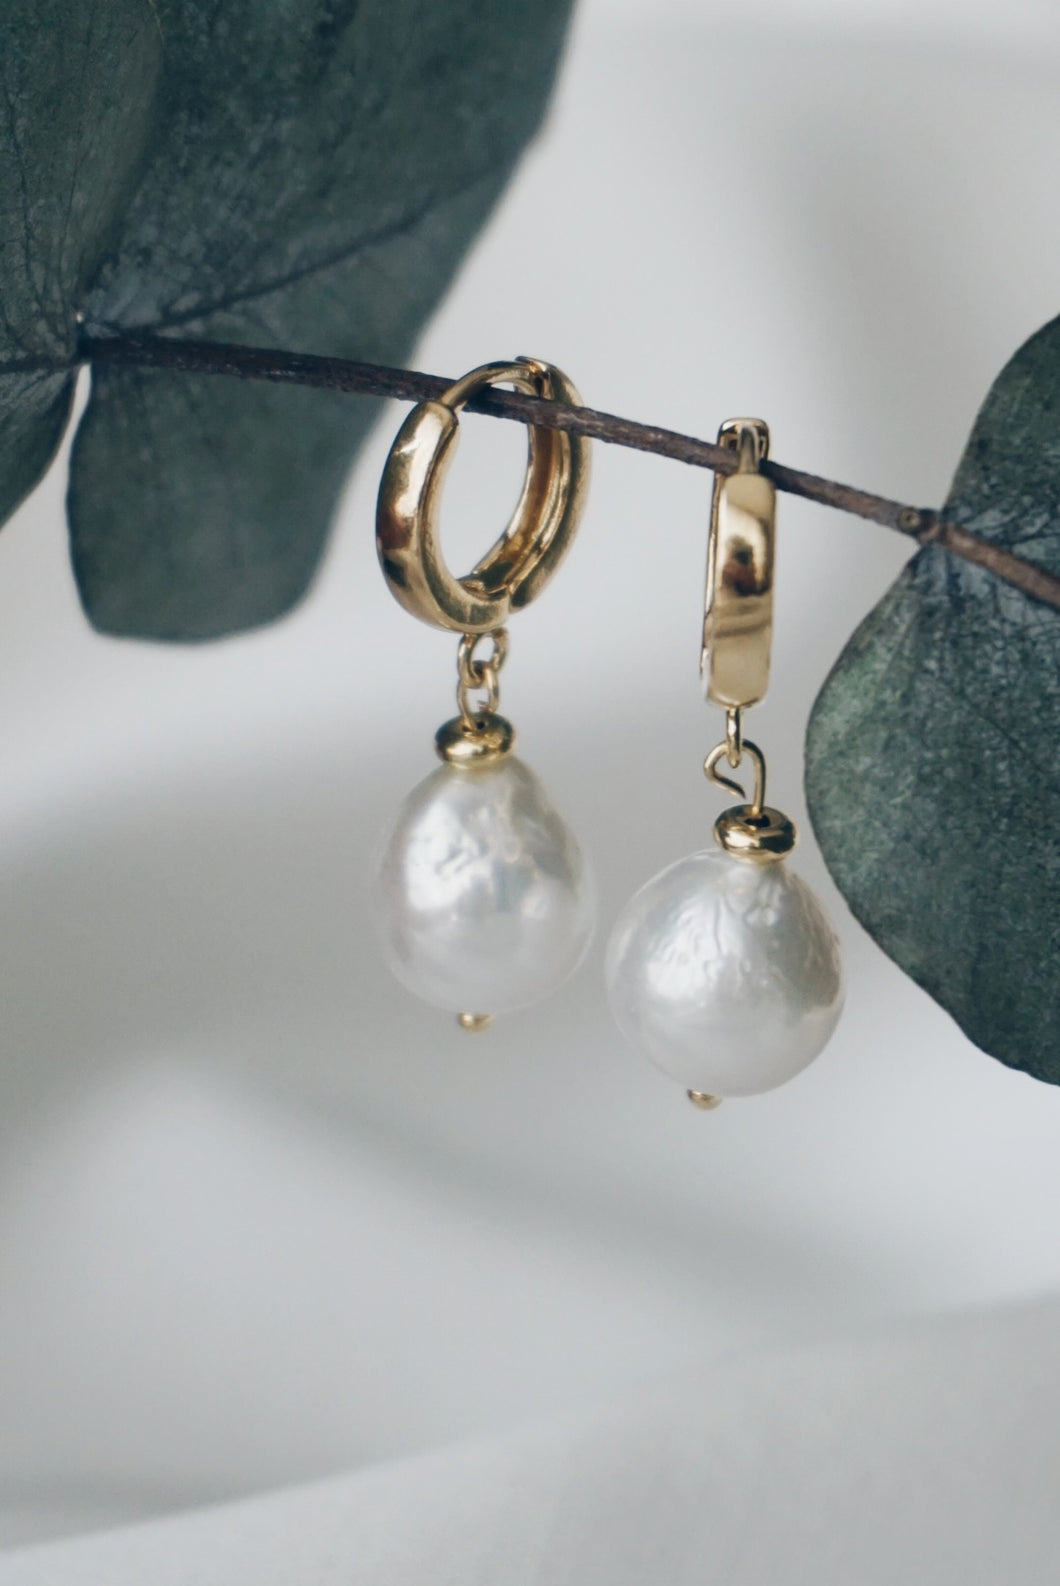 Timeless pearly earrings